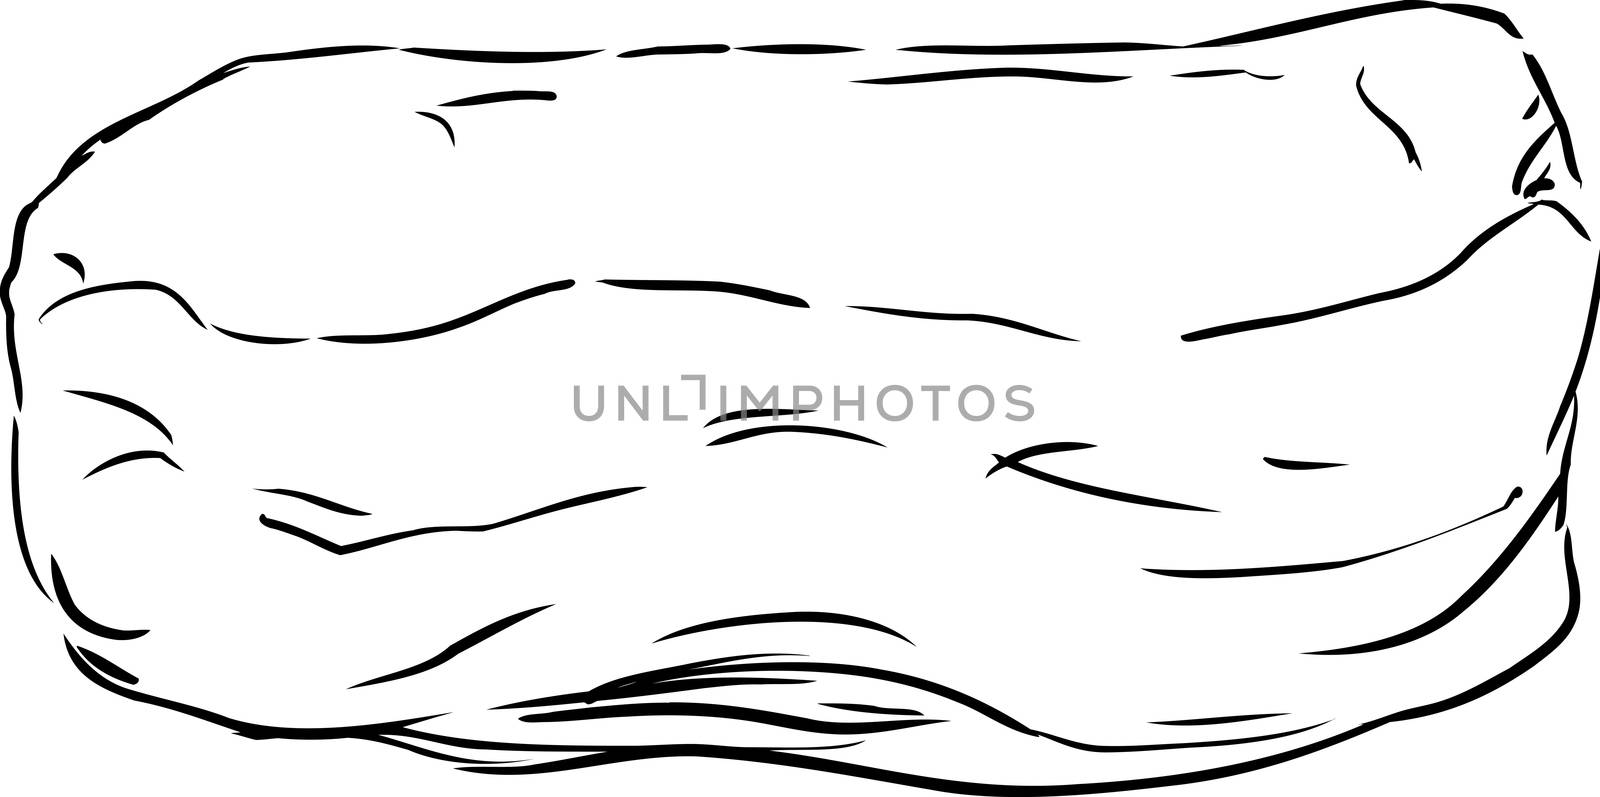 Single outlined mushy pillow with wrinkles over white background